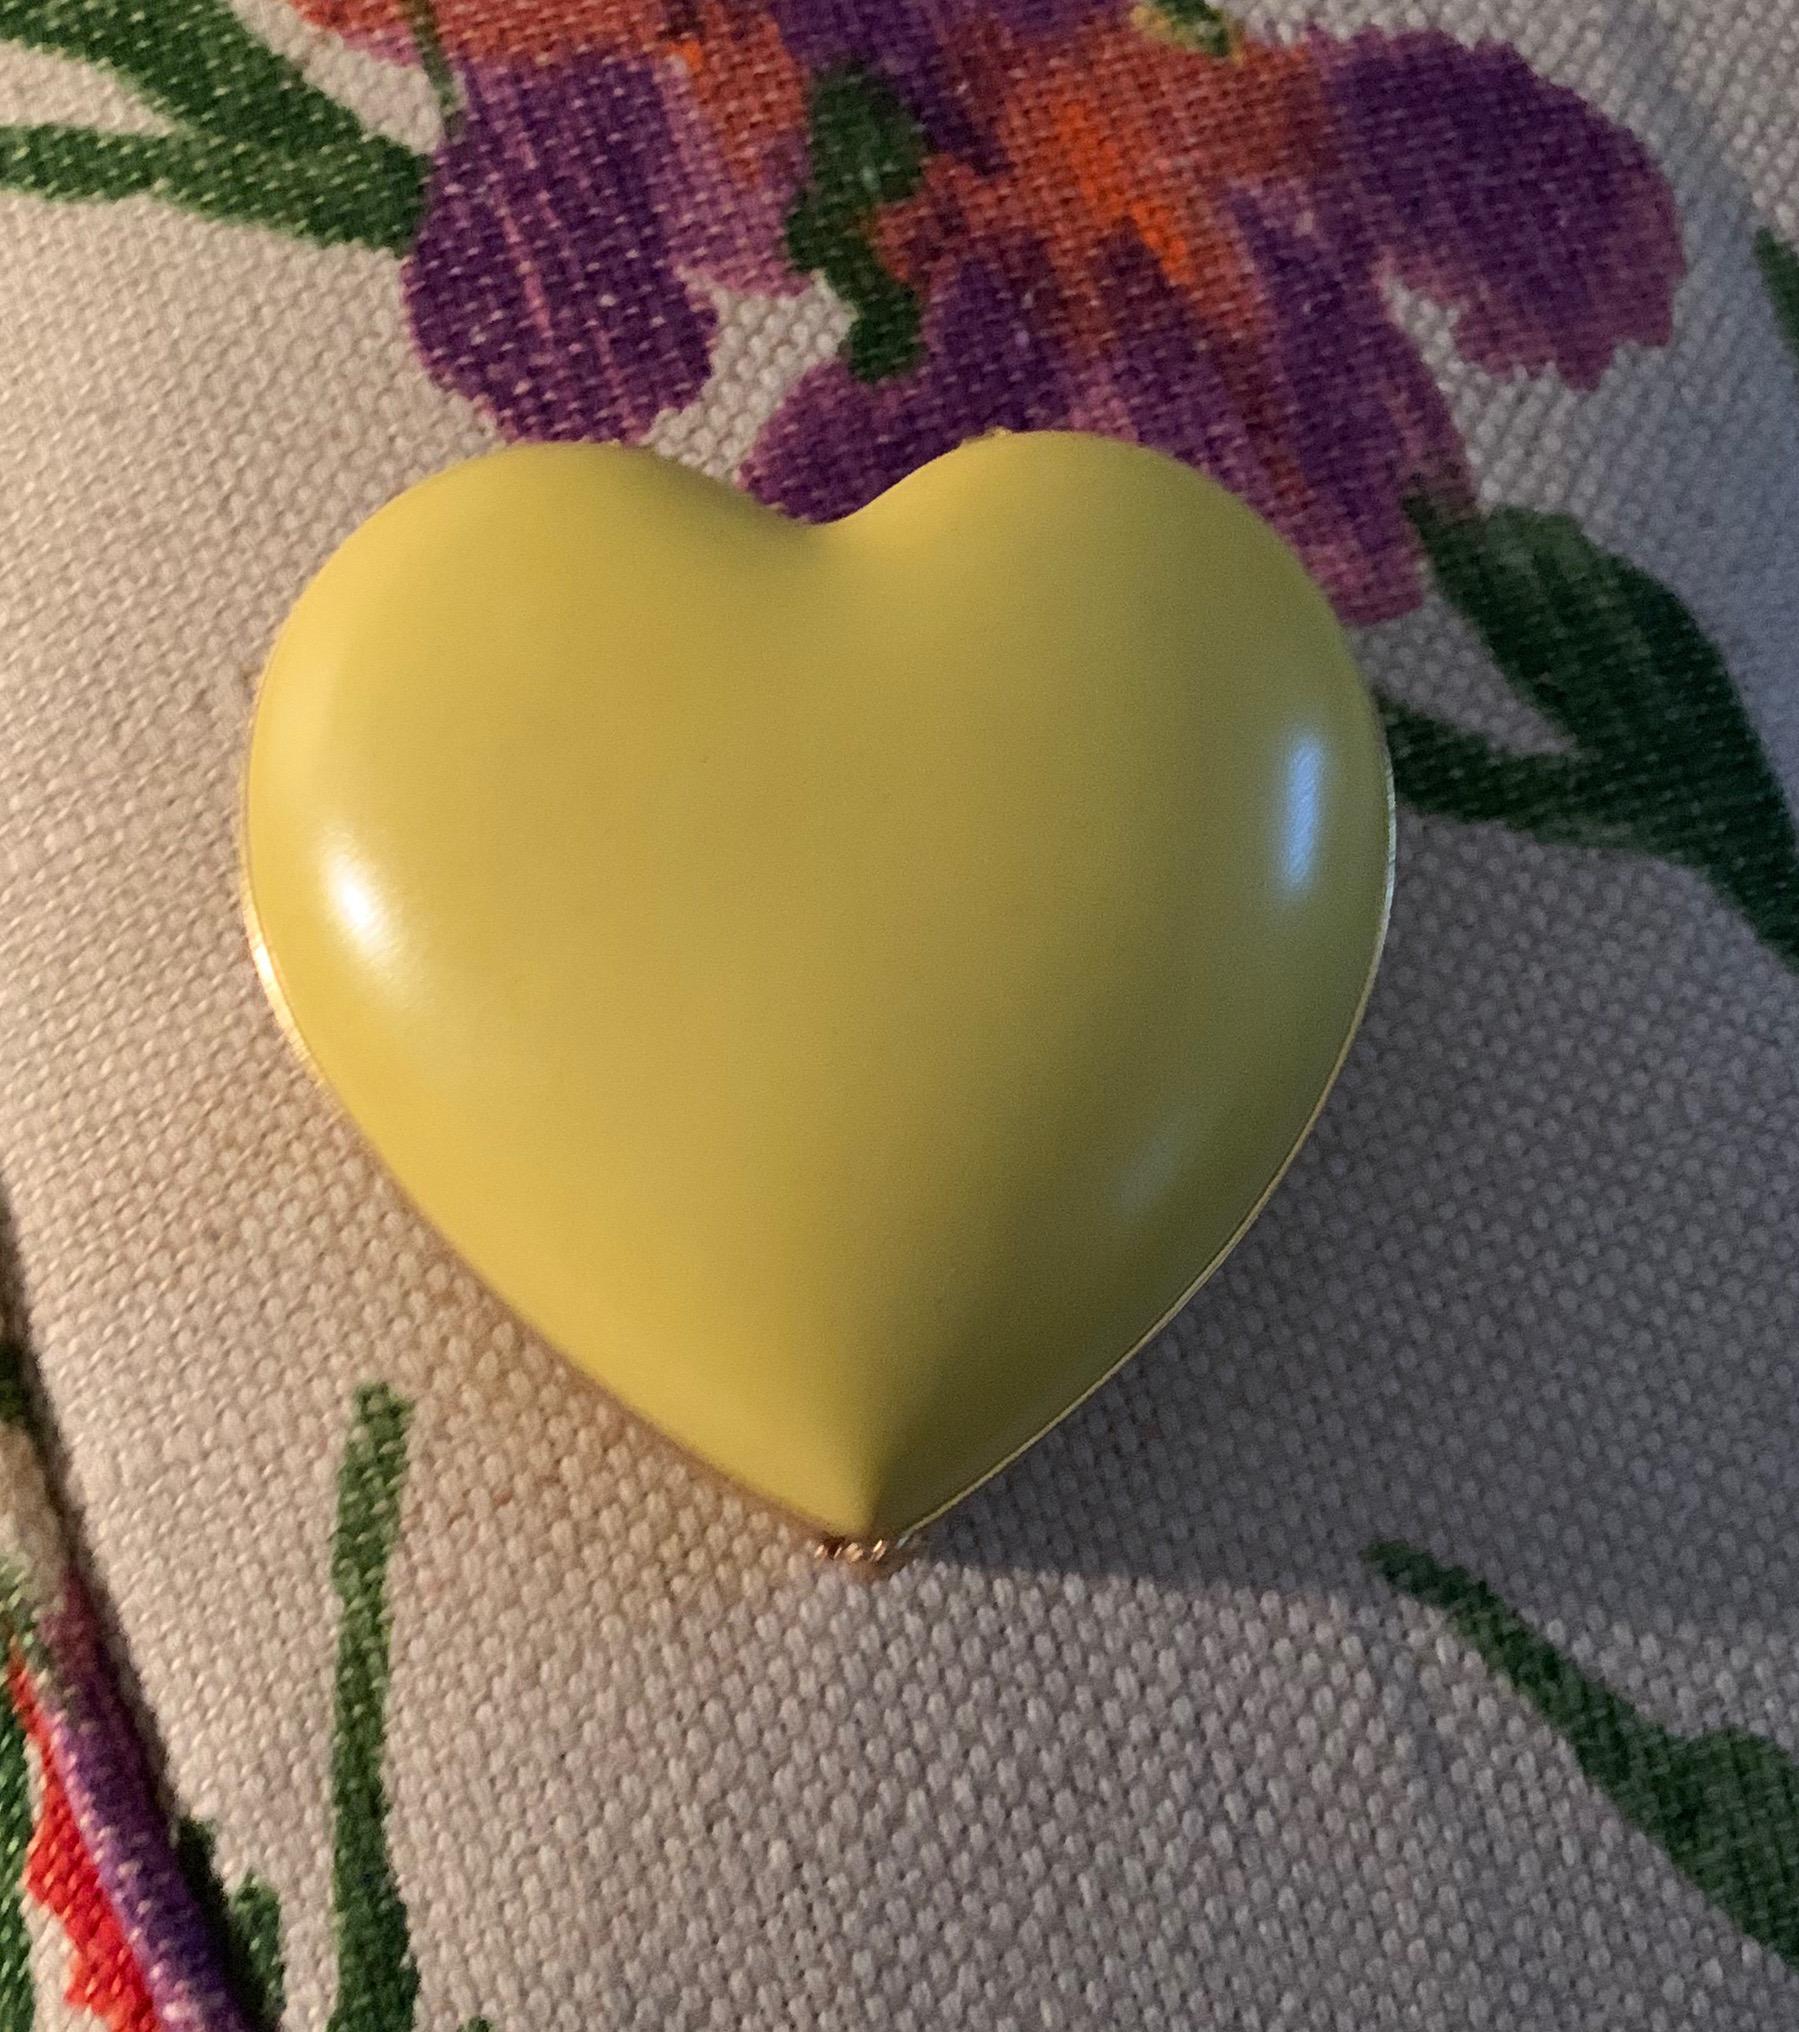 Limoges porcelain heart trinket box, canary yellow.
French porcelain jewelry bic with brass accent and clasp. 2 available. Listing is for one. With maker’s mark.